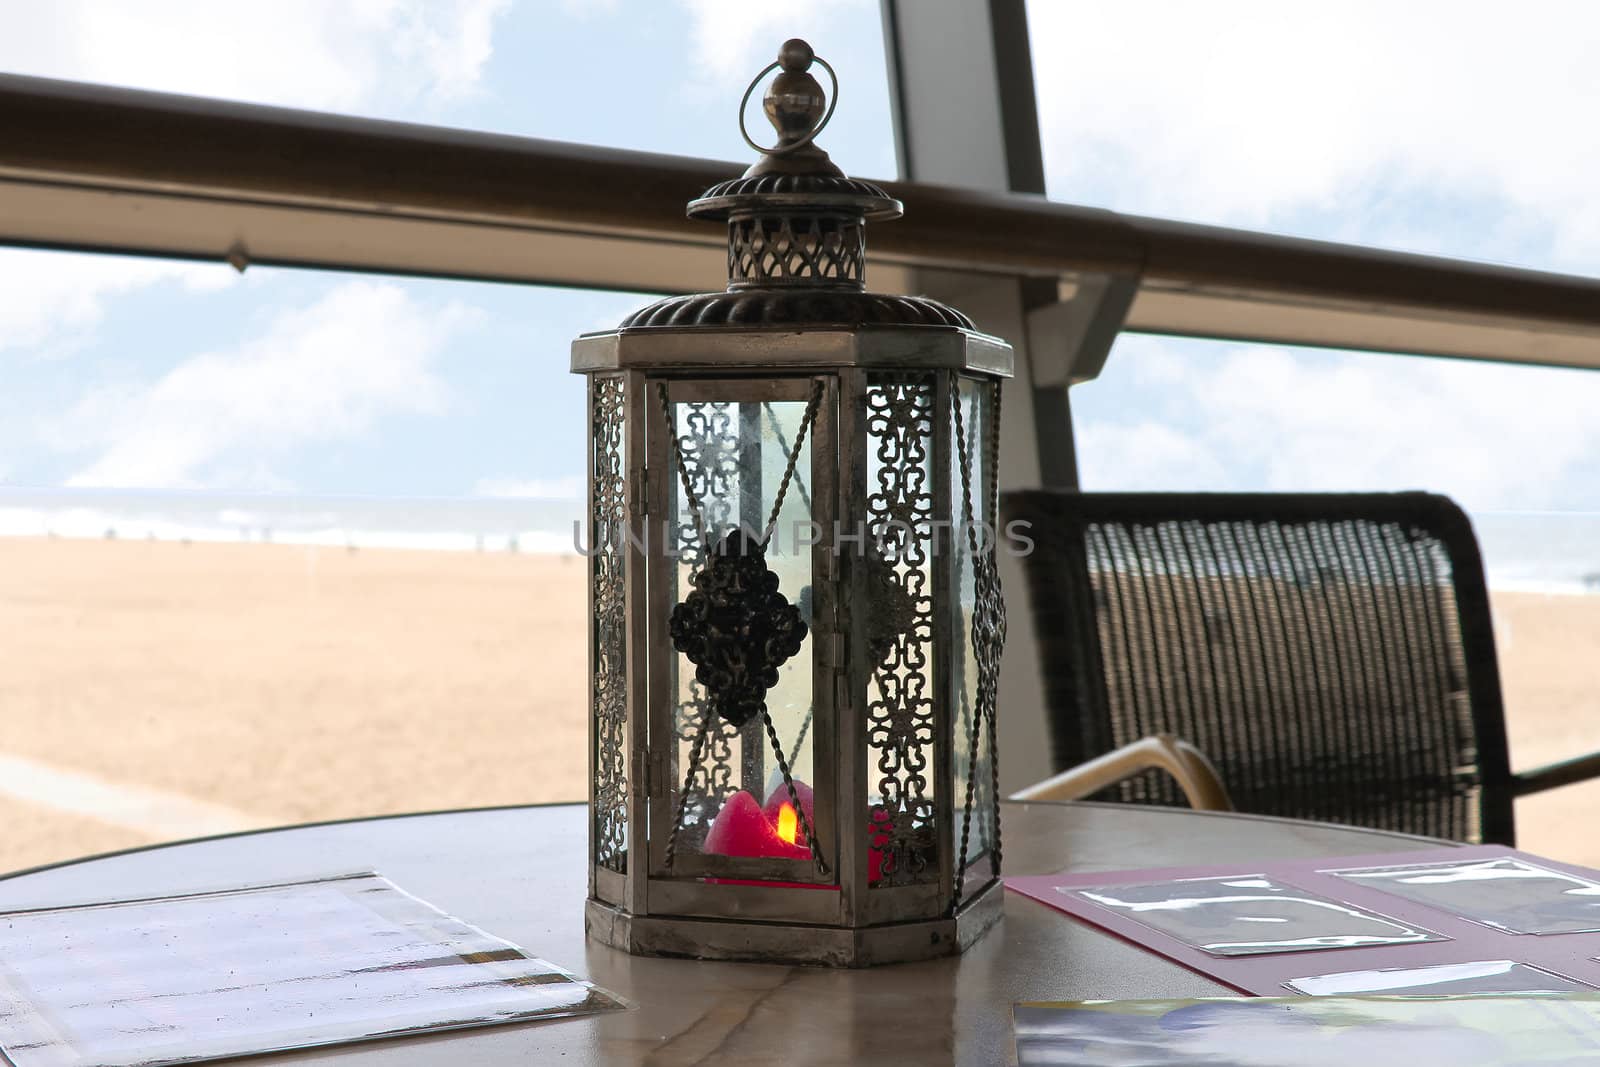 A candle in a decorative candlestick at the beach cafe. Den Haag by NickNick